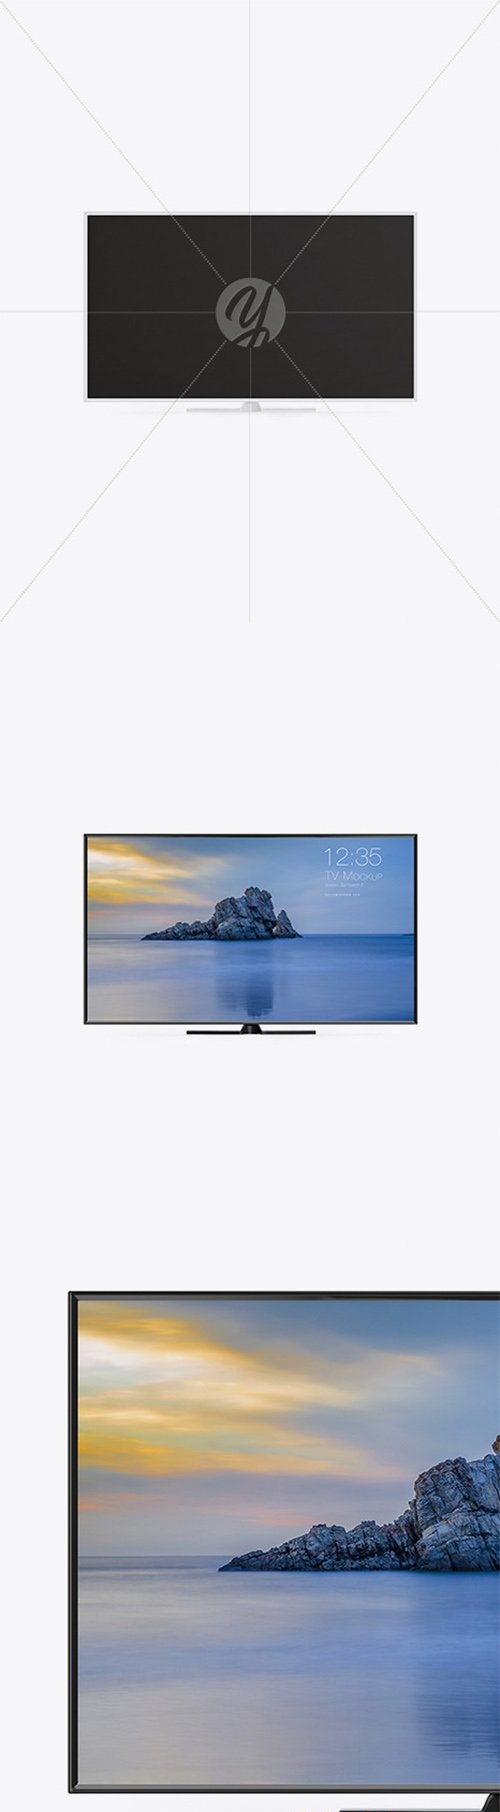 TV Mockup - Front View 66580